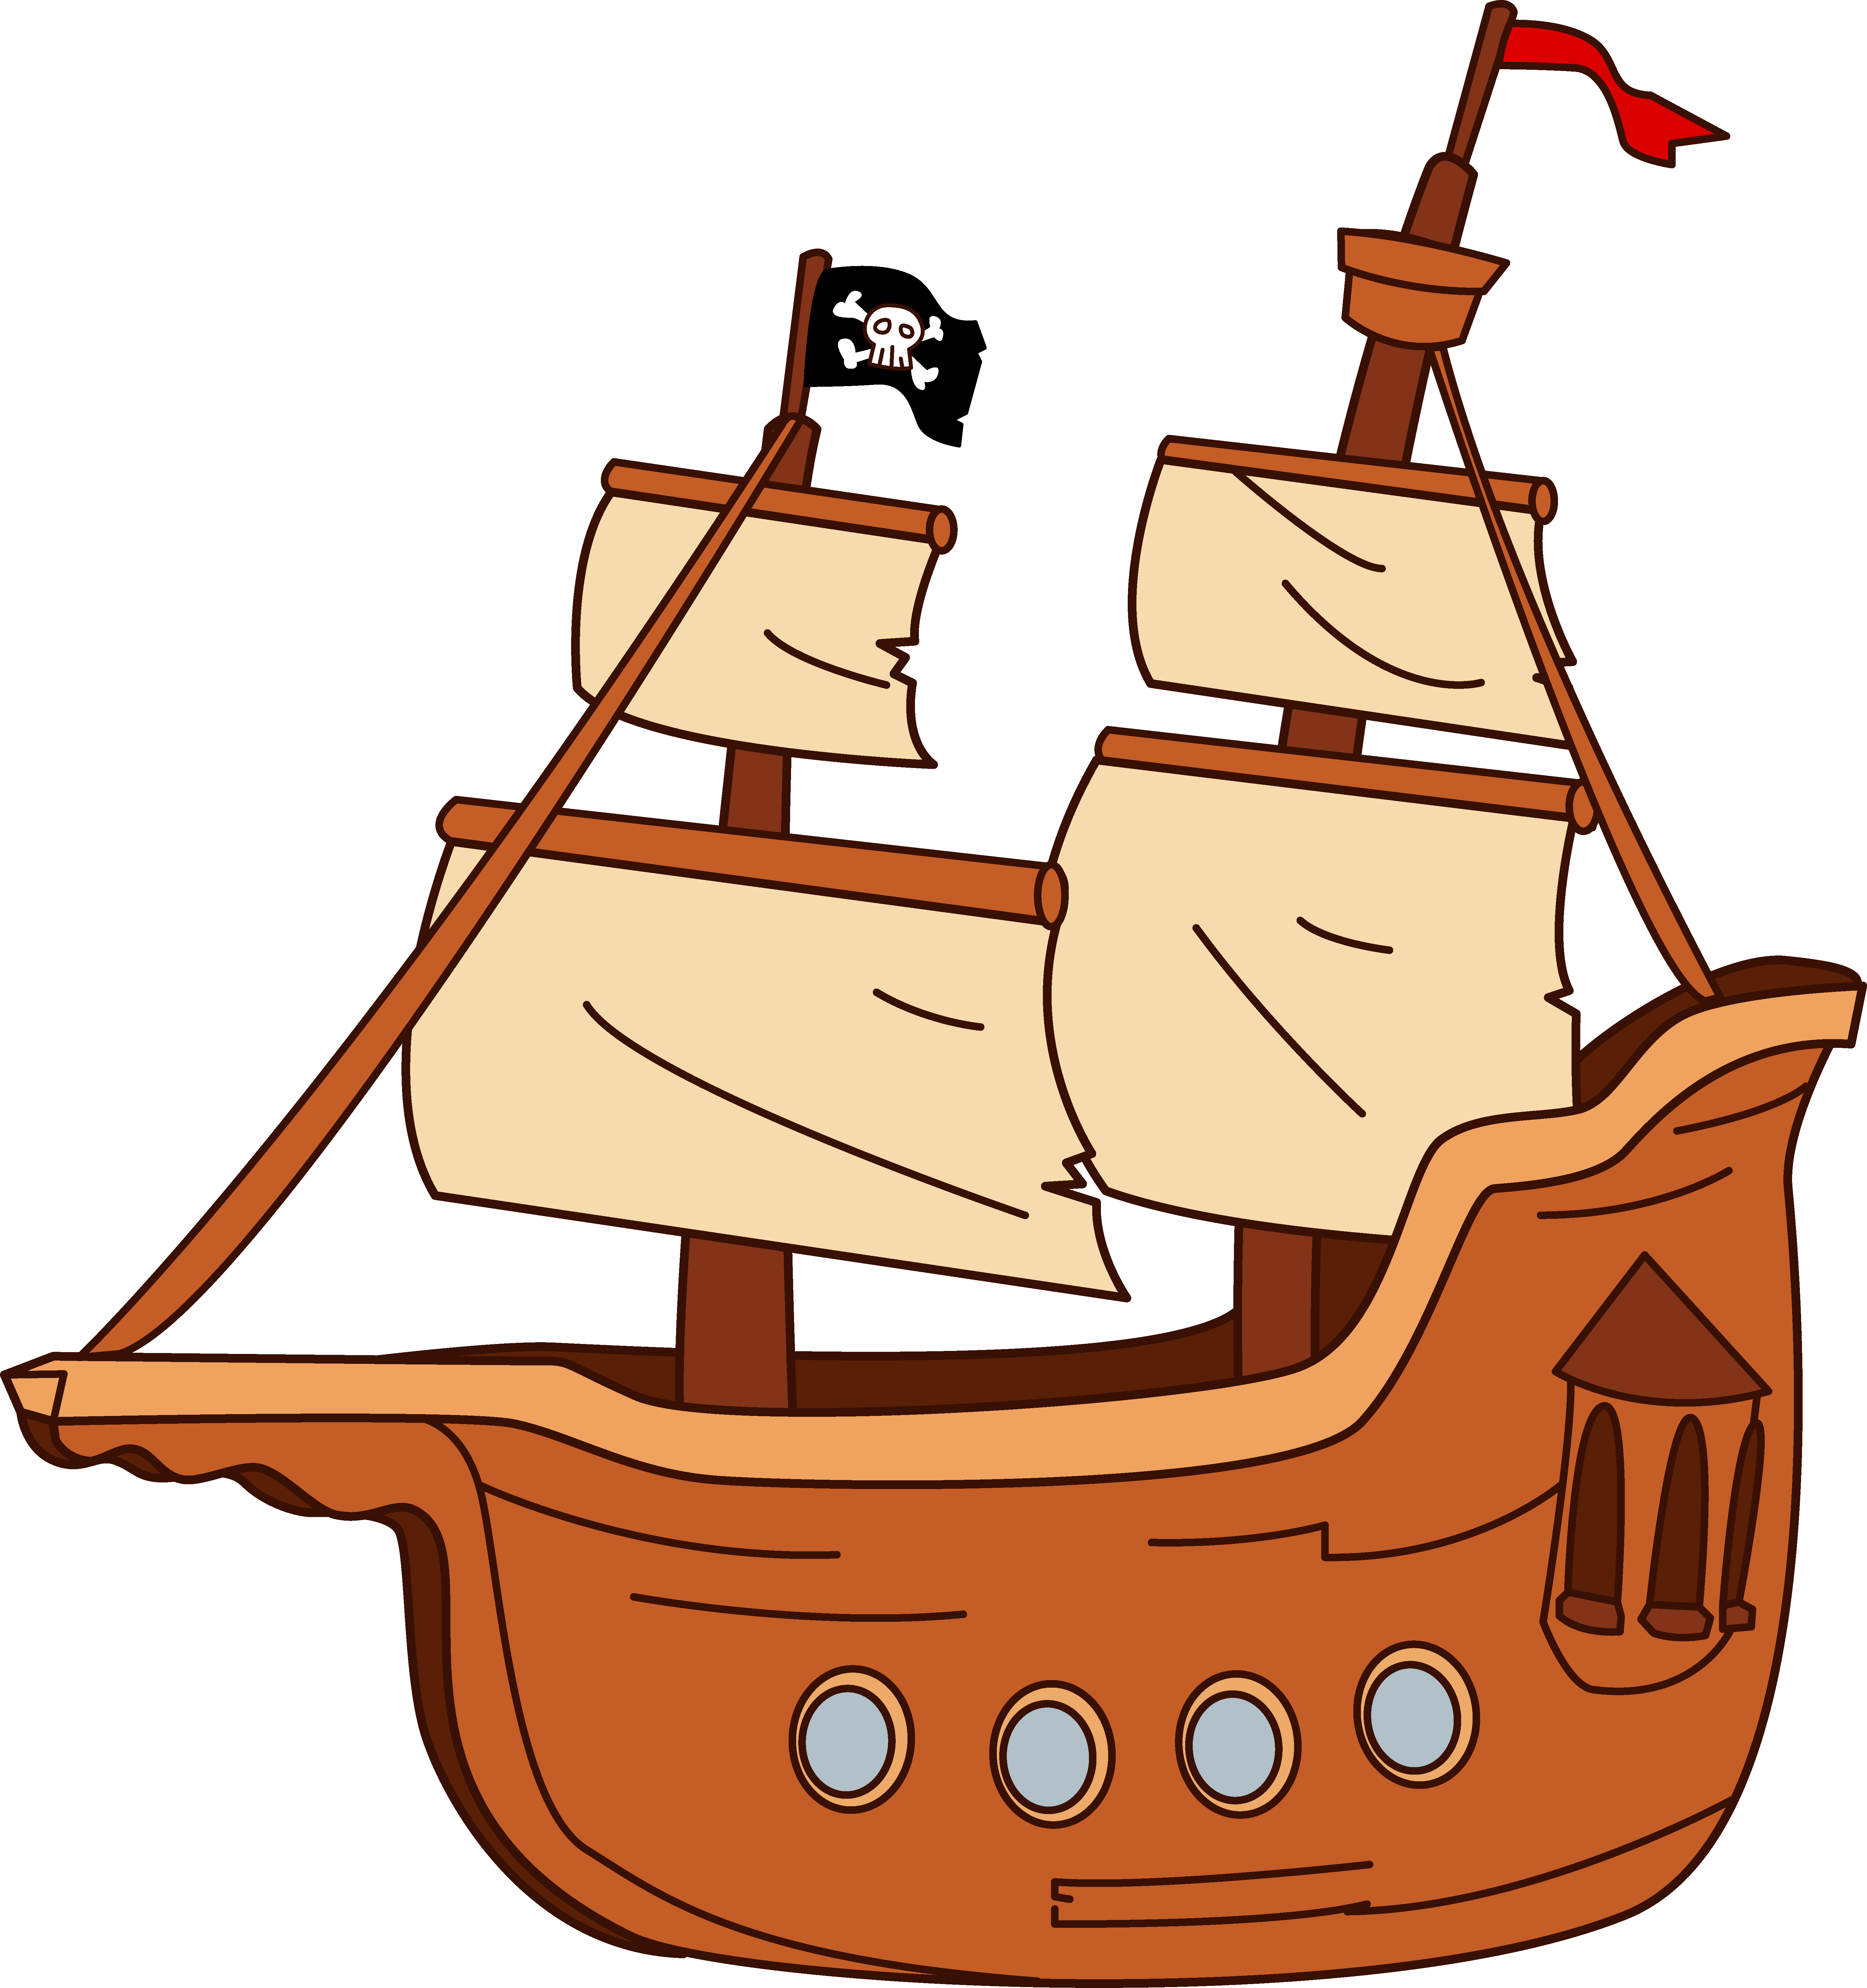 Clip Arts Related To : mayflower ship clipart. view all cartoon-ship-clipar...